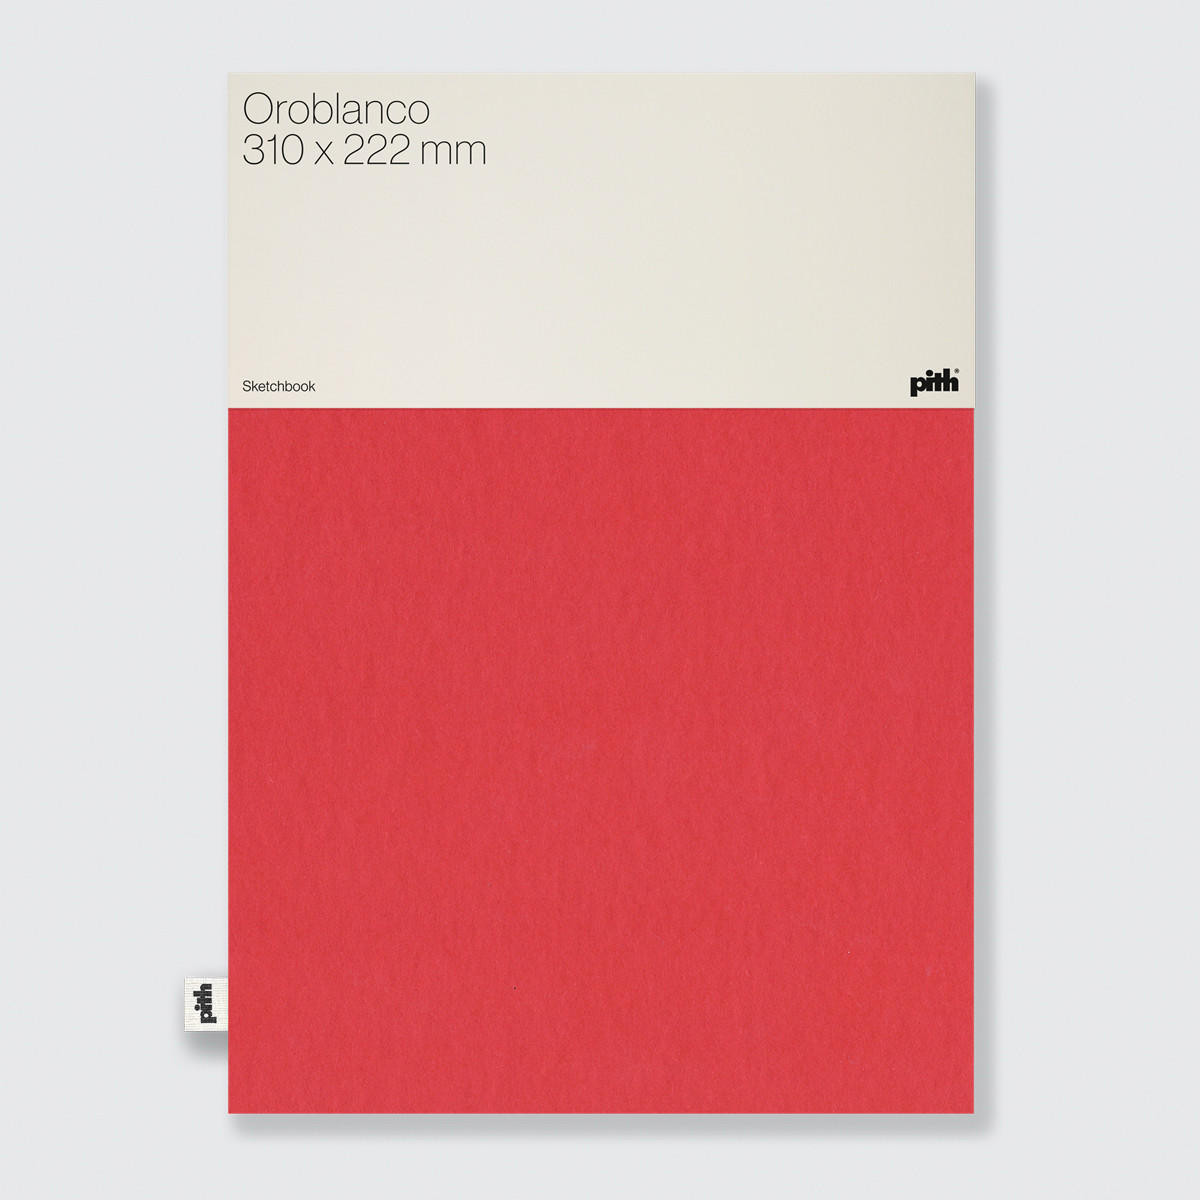 Pith Oroblanco Sketchbook 200gsm 76 Pages 310 x 222mm Red